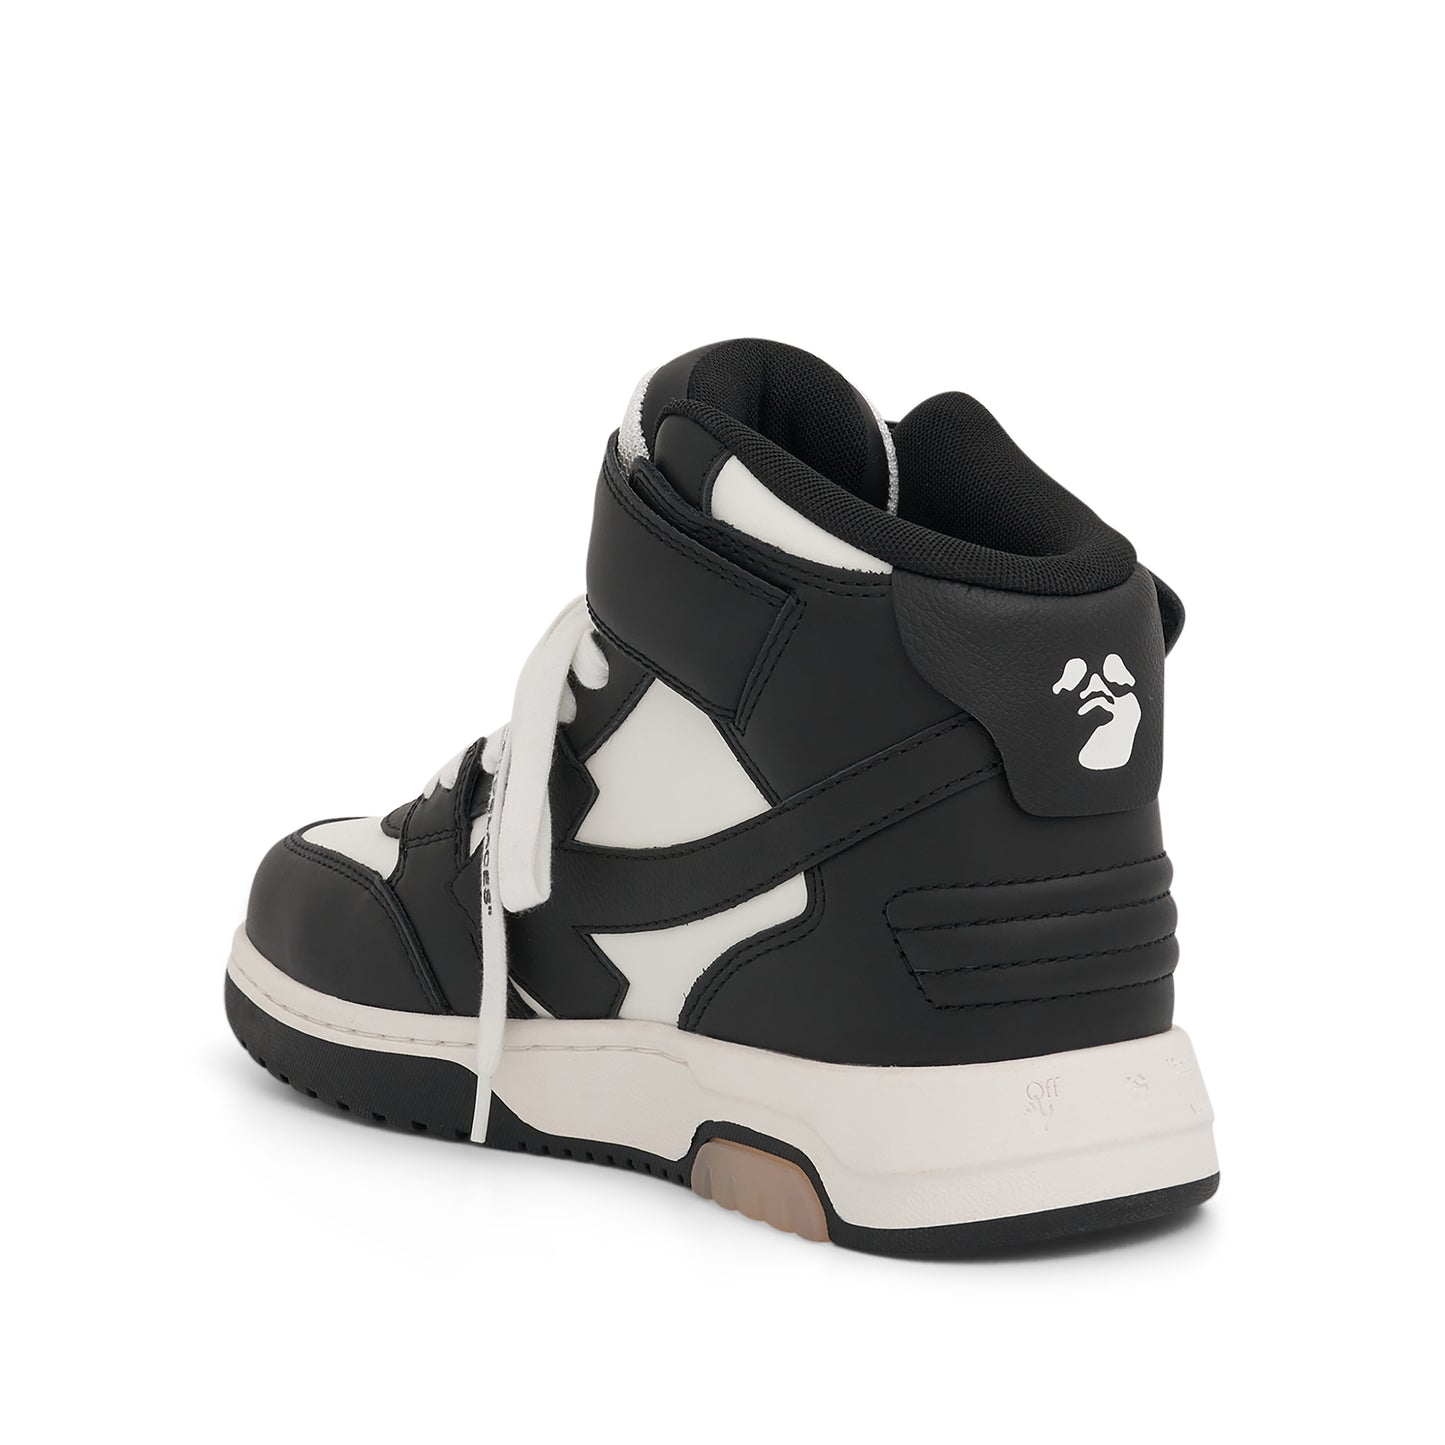 Out Of Office Mid Top Leather Sneakers in Black/White